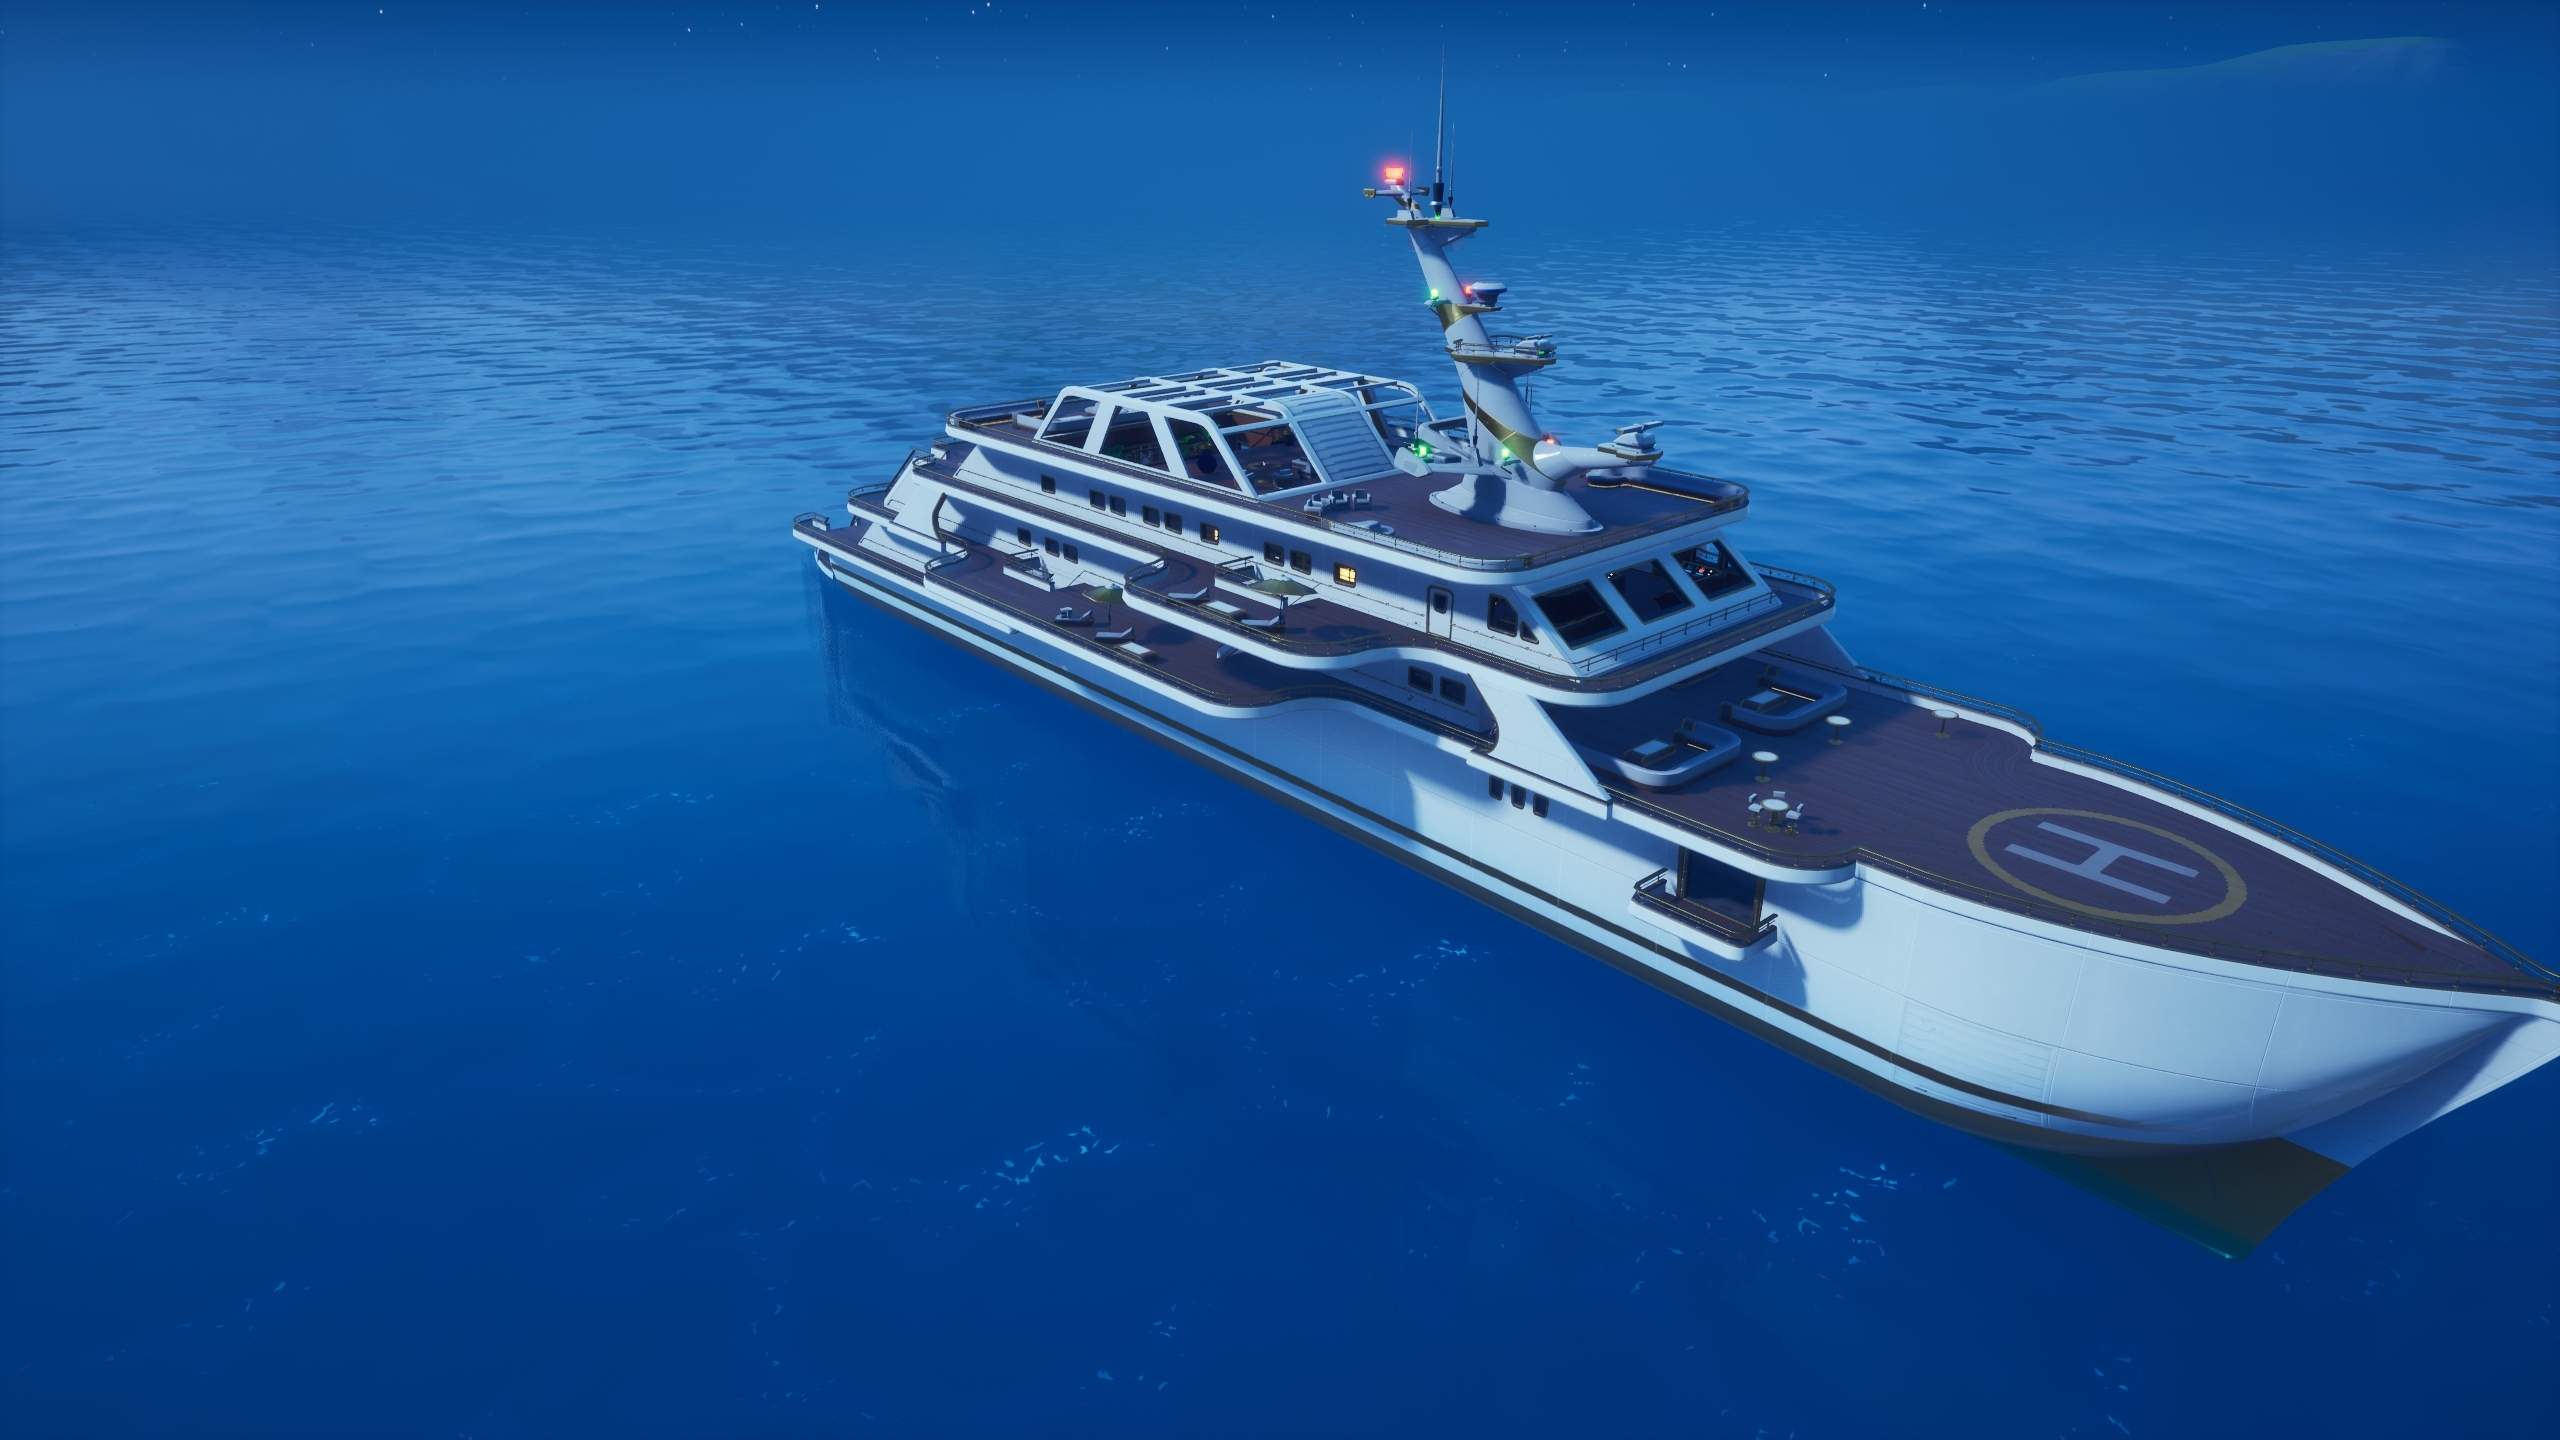 PROPHUNT: THE YACHT